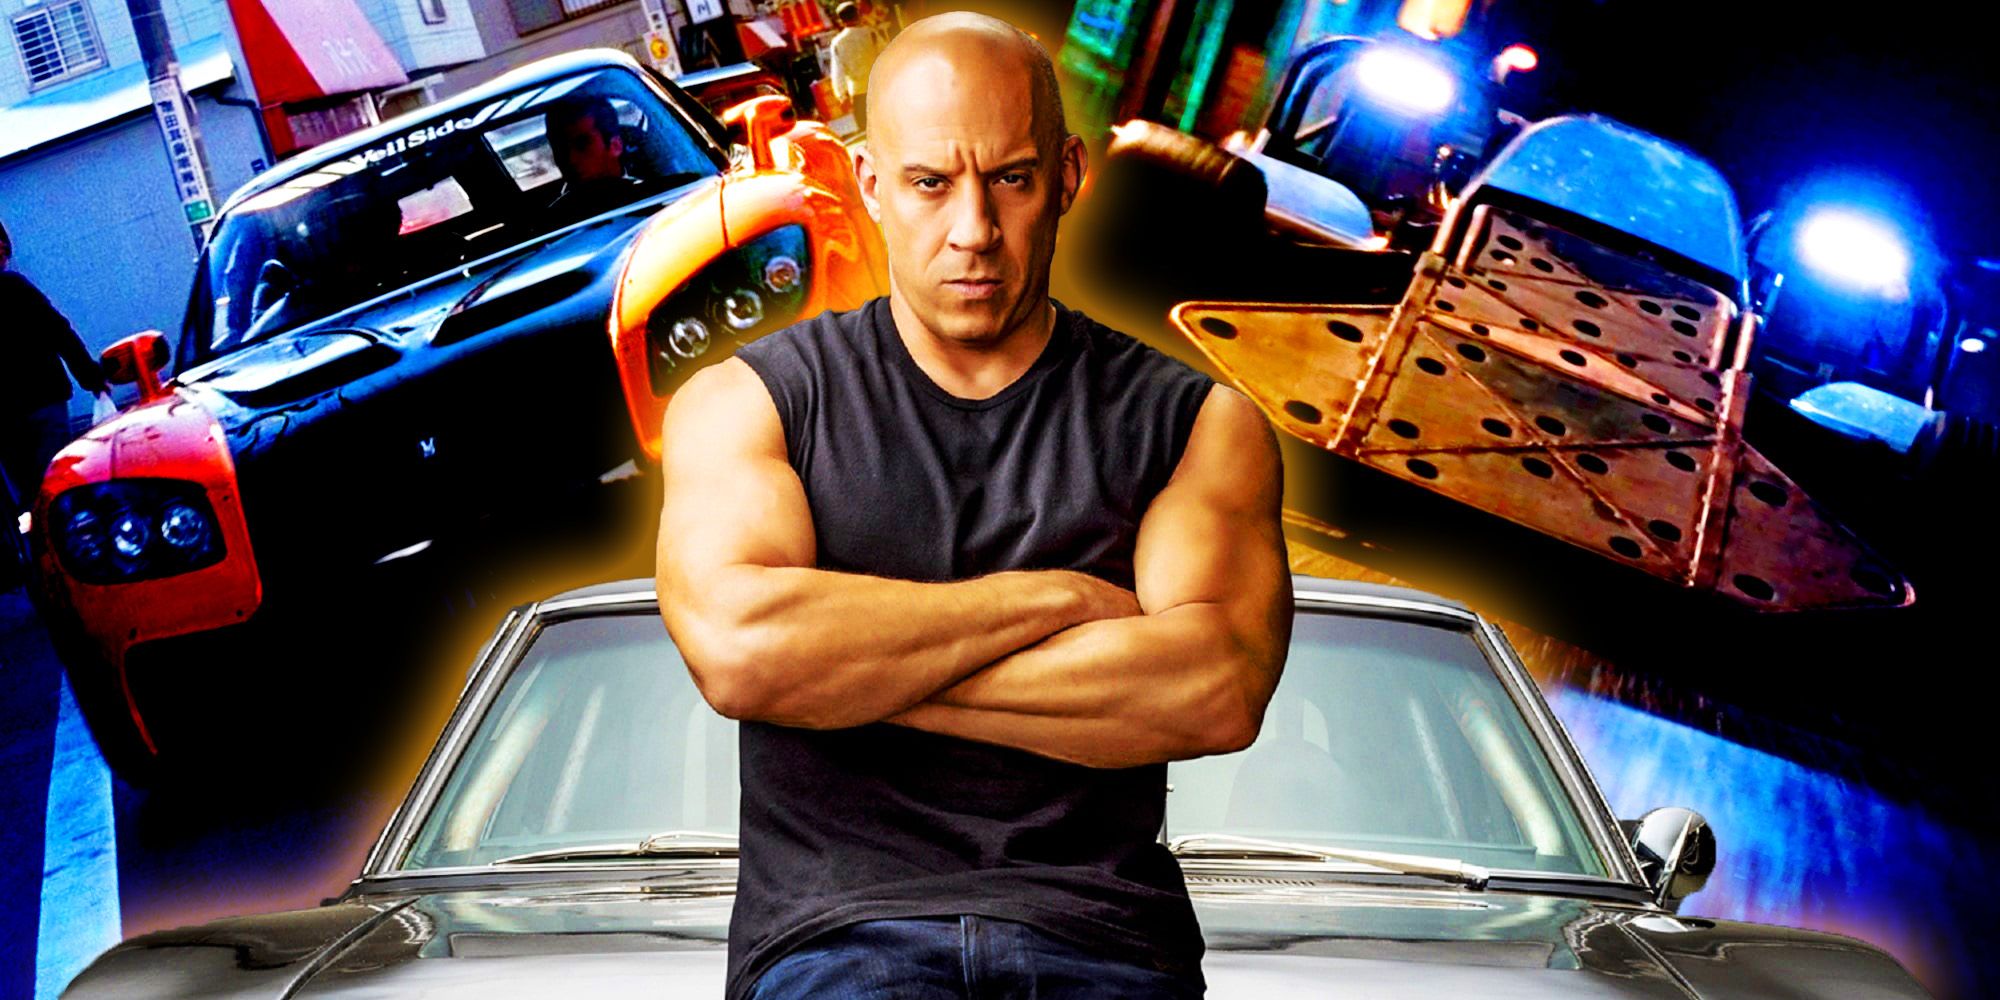 Vin Diesel as Dominic Toretto with his Dodge Charger plus Flip Car and more from Fast and Furious franchise